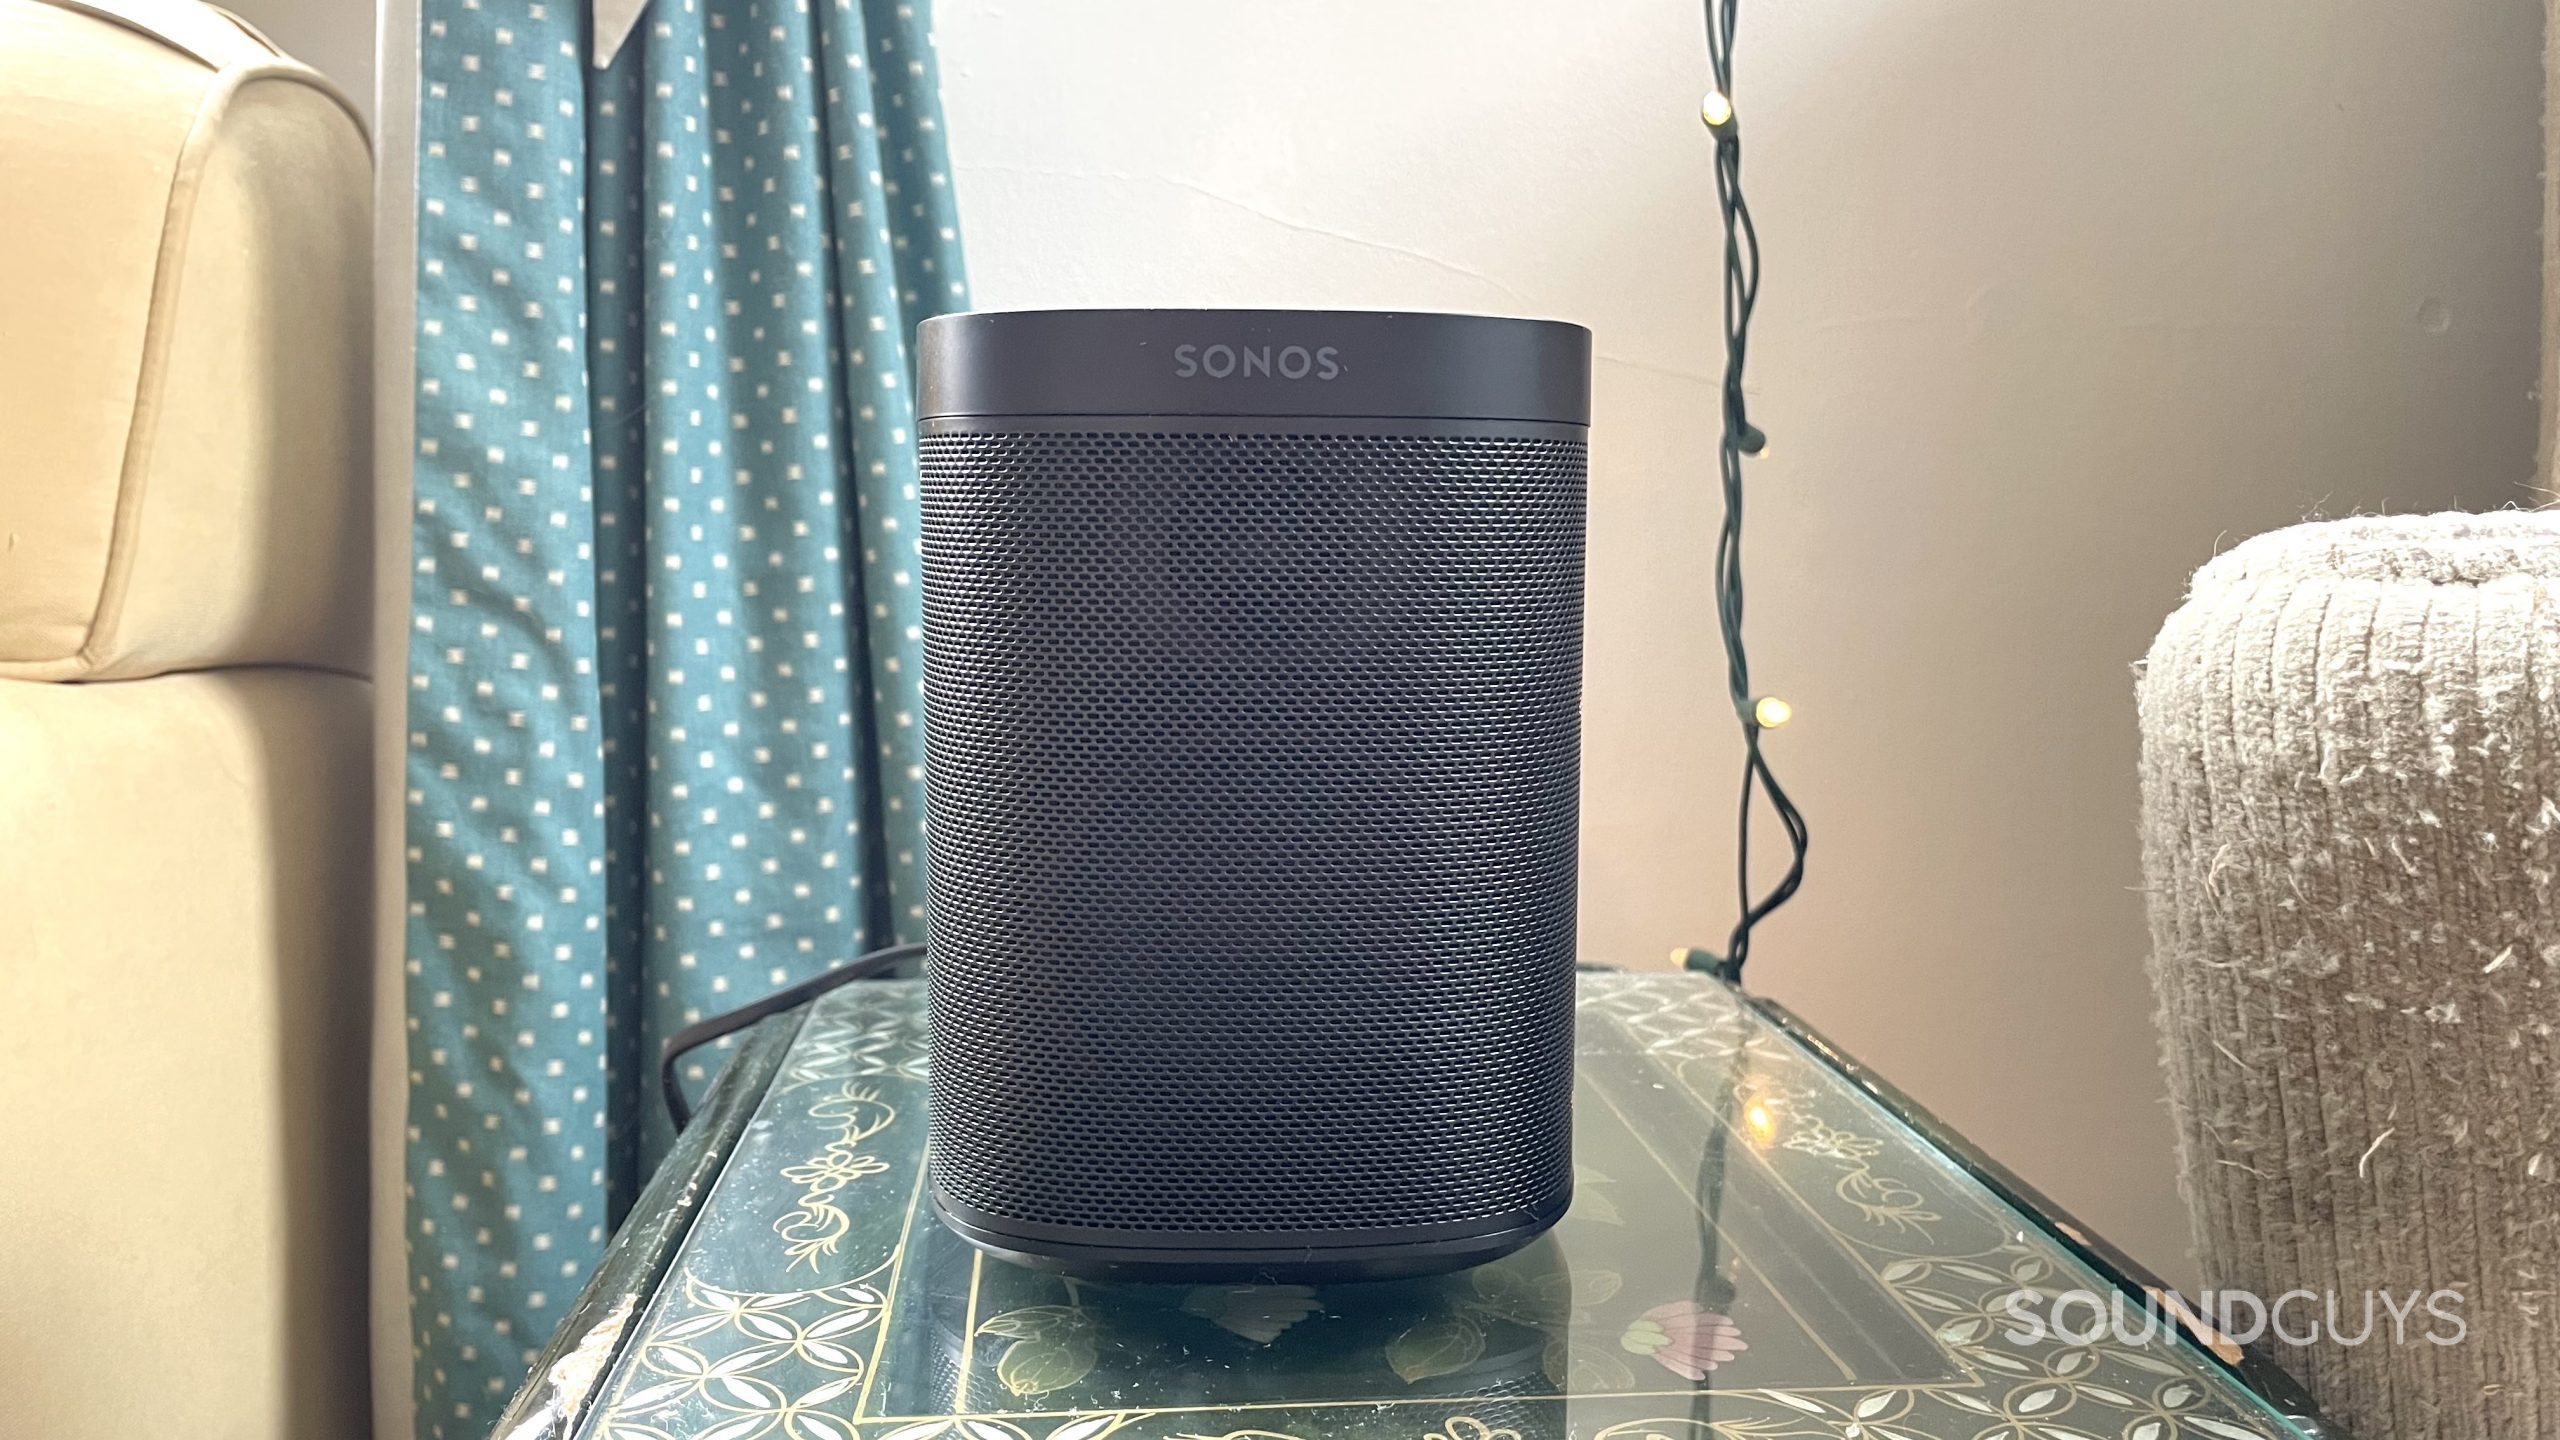 Sonos (Gen 2) review: Sleek and powerful SoundGuys